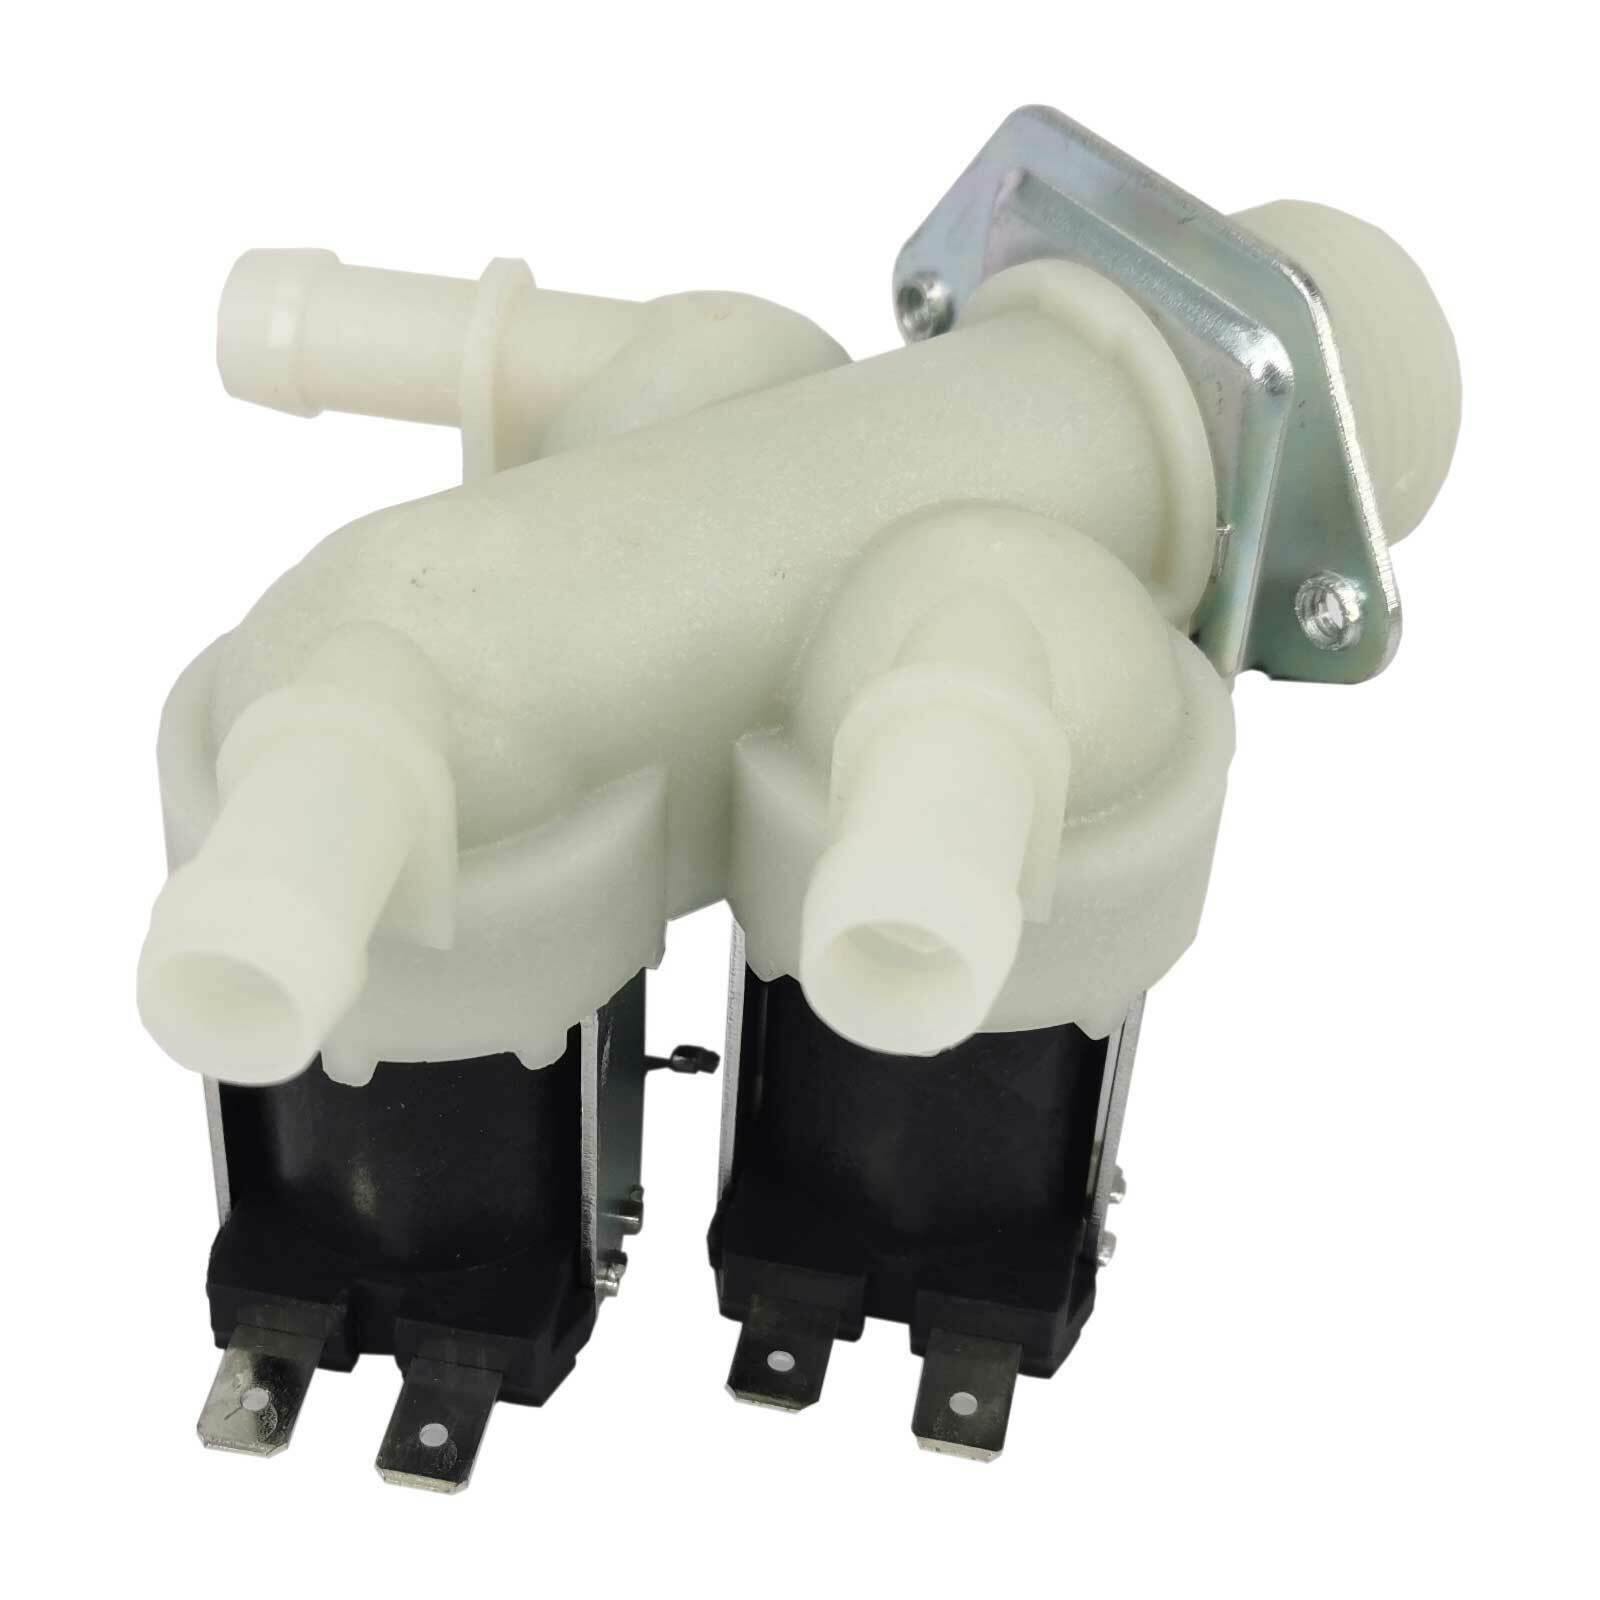 Washing Machine Triple Water Inlet Valve For LG WD1402CRD6 WD14030RD WD14030RD6 Sparesbarn